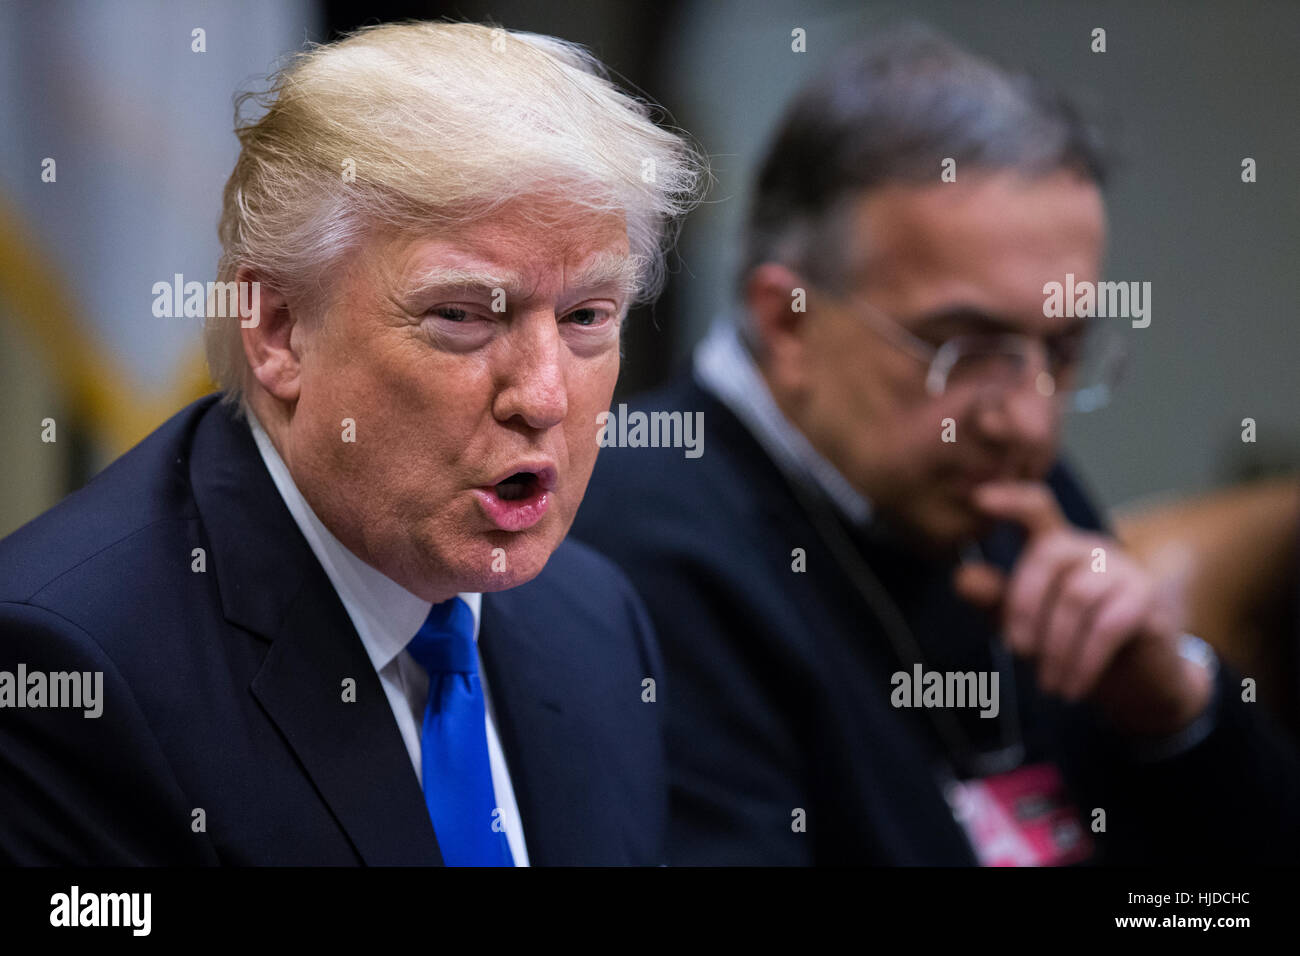 Washington, USA. 24th Jan, 2017. US President Donald Trump (L), with CEO of Fiat Chrysler Automobiles Sergio Marchionne (R), delivers remarks to automobile industry leaders during a meeting in the Roosevelt Room of the White House in Washington, DC, USA. Credit: Shawn Thew/Pool via CNP /MediaPunch/Alamy Live News Stock Photo